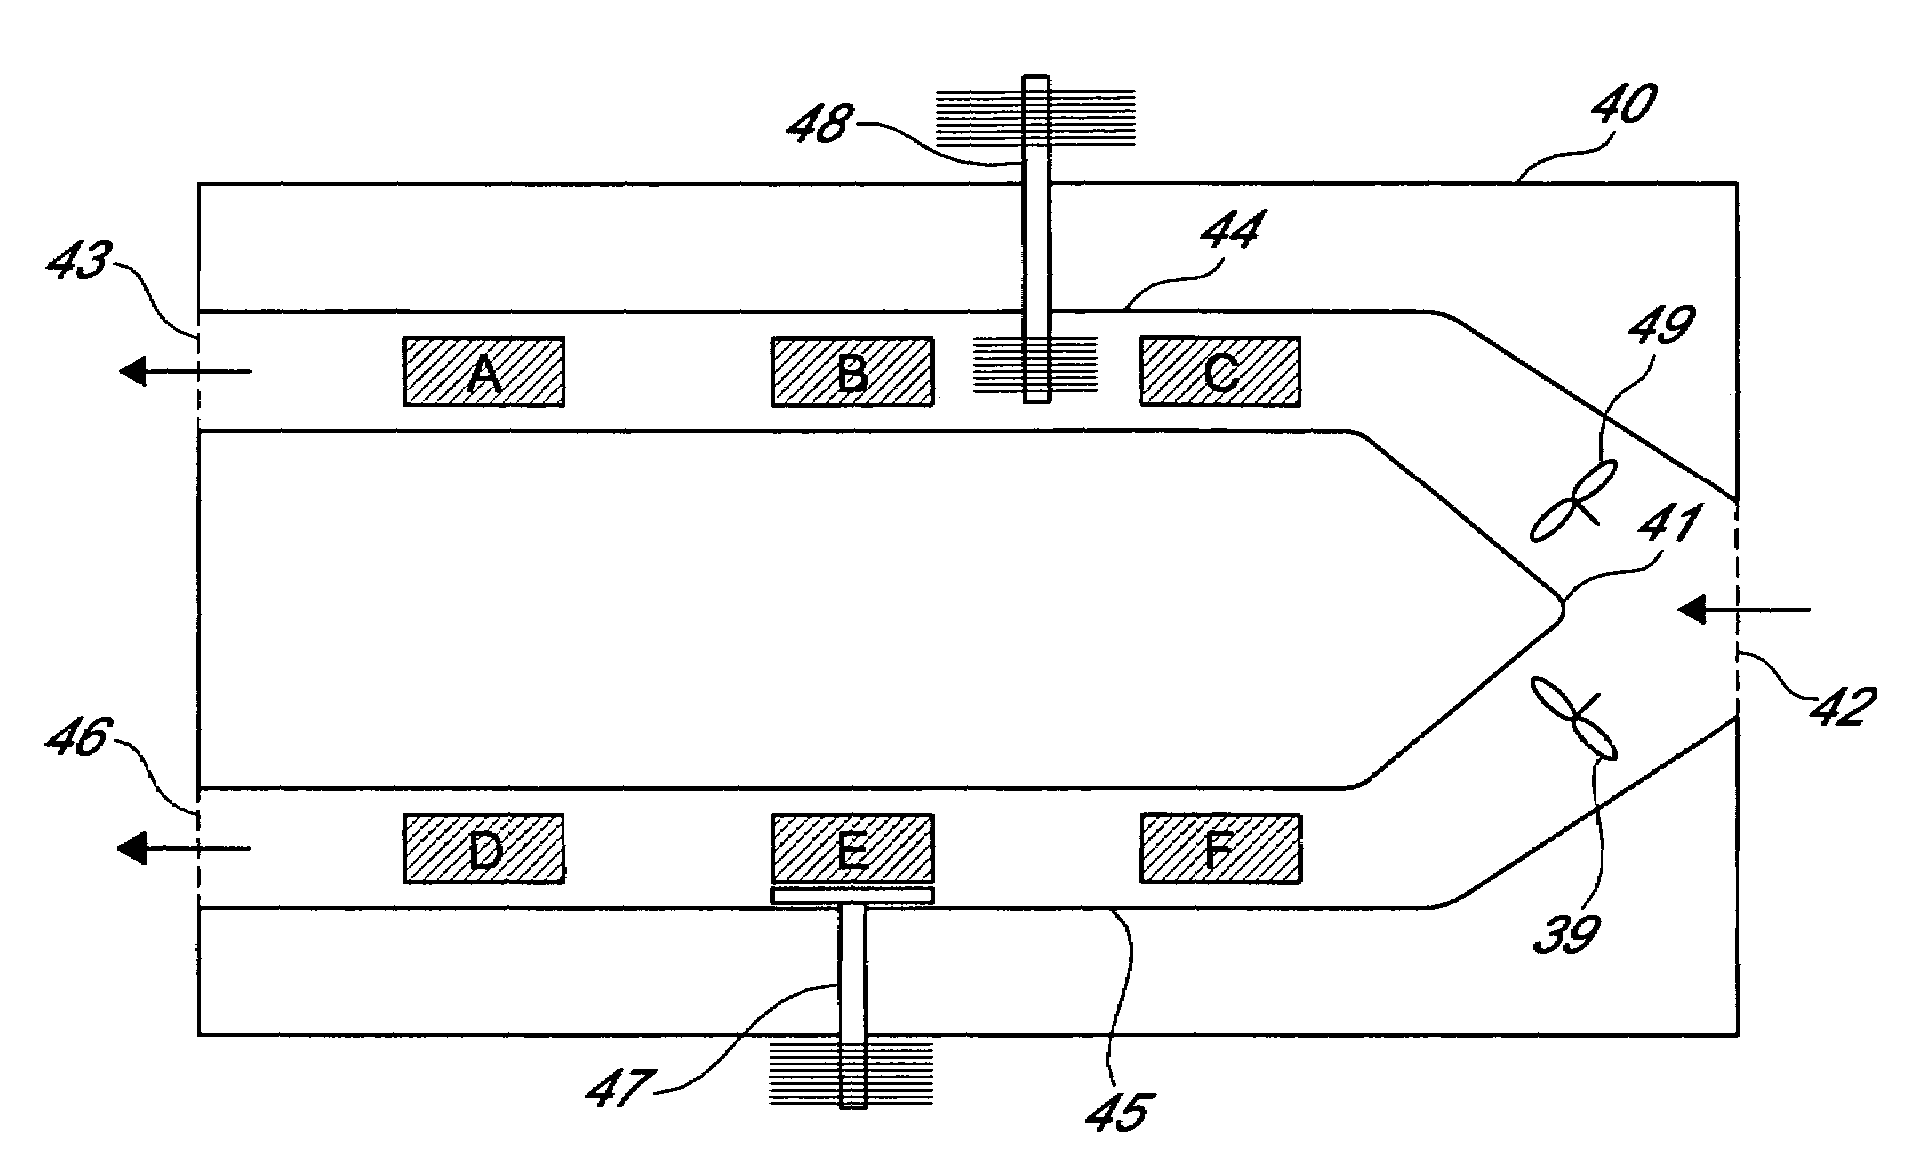 Apparatus and method for cooling electronics and computer components with managed and prioritized directional air flow heat rejection